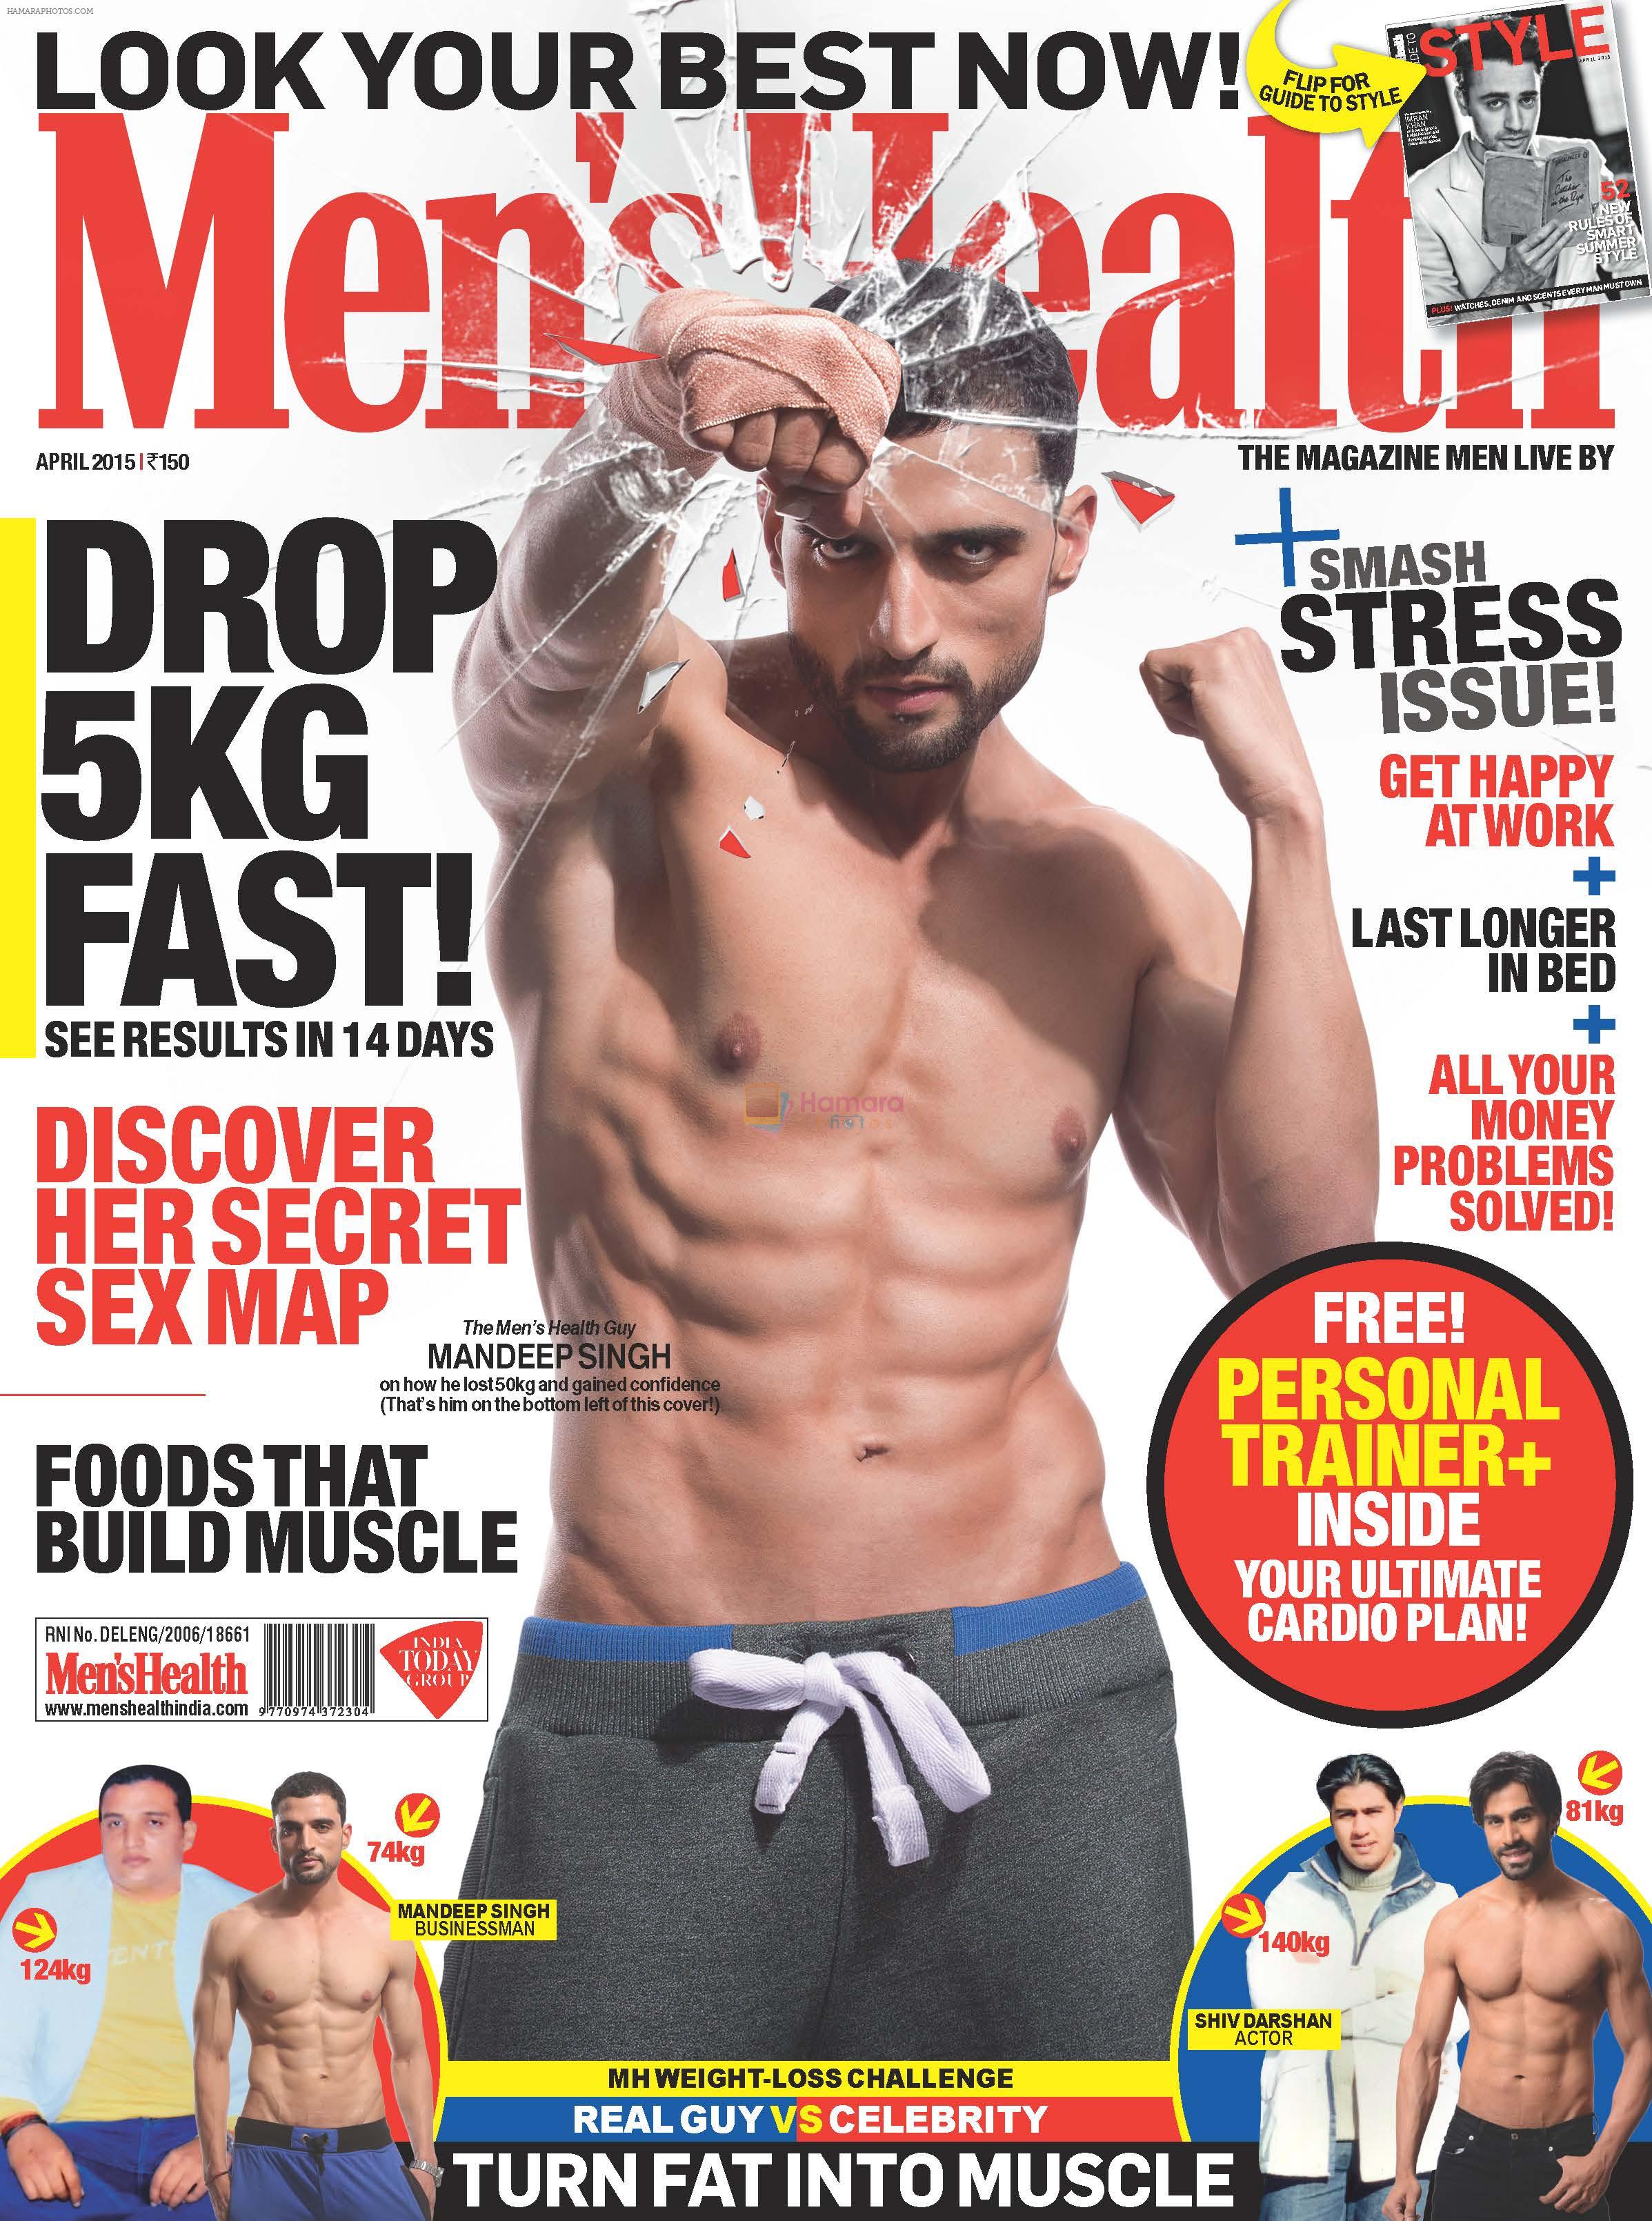 IMRAN KHAN on the cover of GUIDE TO STYLE (Men's Health)